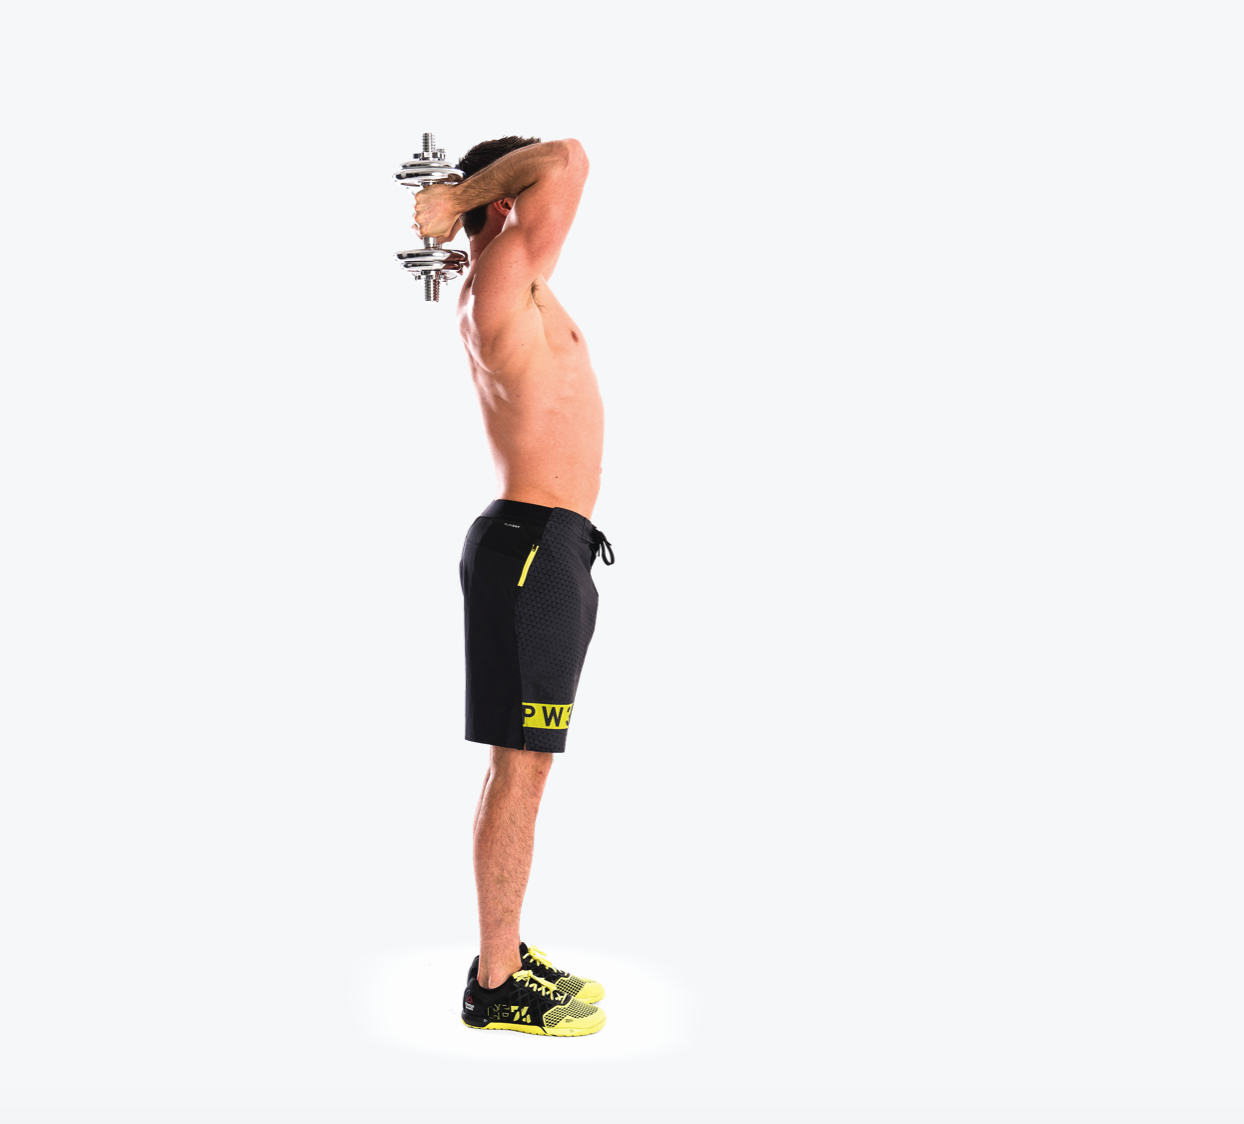 man demonstrates triceps extension in dumbbell shoulder and arm workout; standing tall, he holds a dumbbell behind his head with both hands before raising it up and lowering it